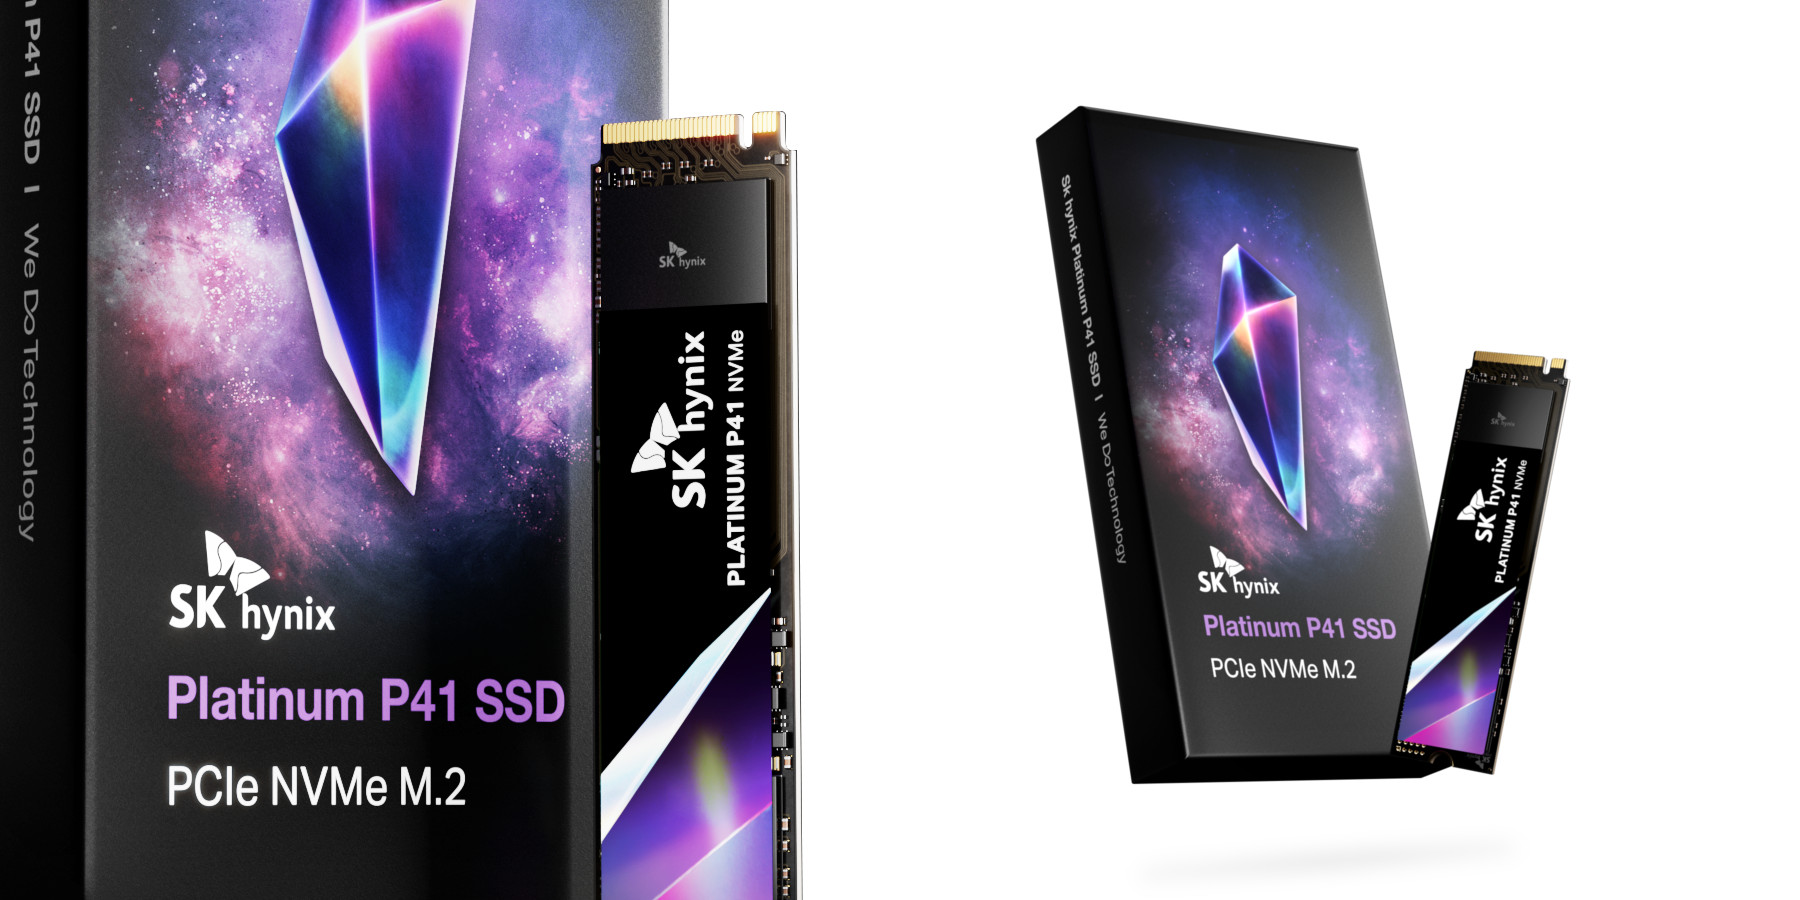 CES SSD unveils kick off with the new SK hynix Platinum P41 - 9to5Toys